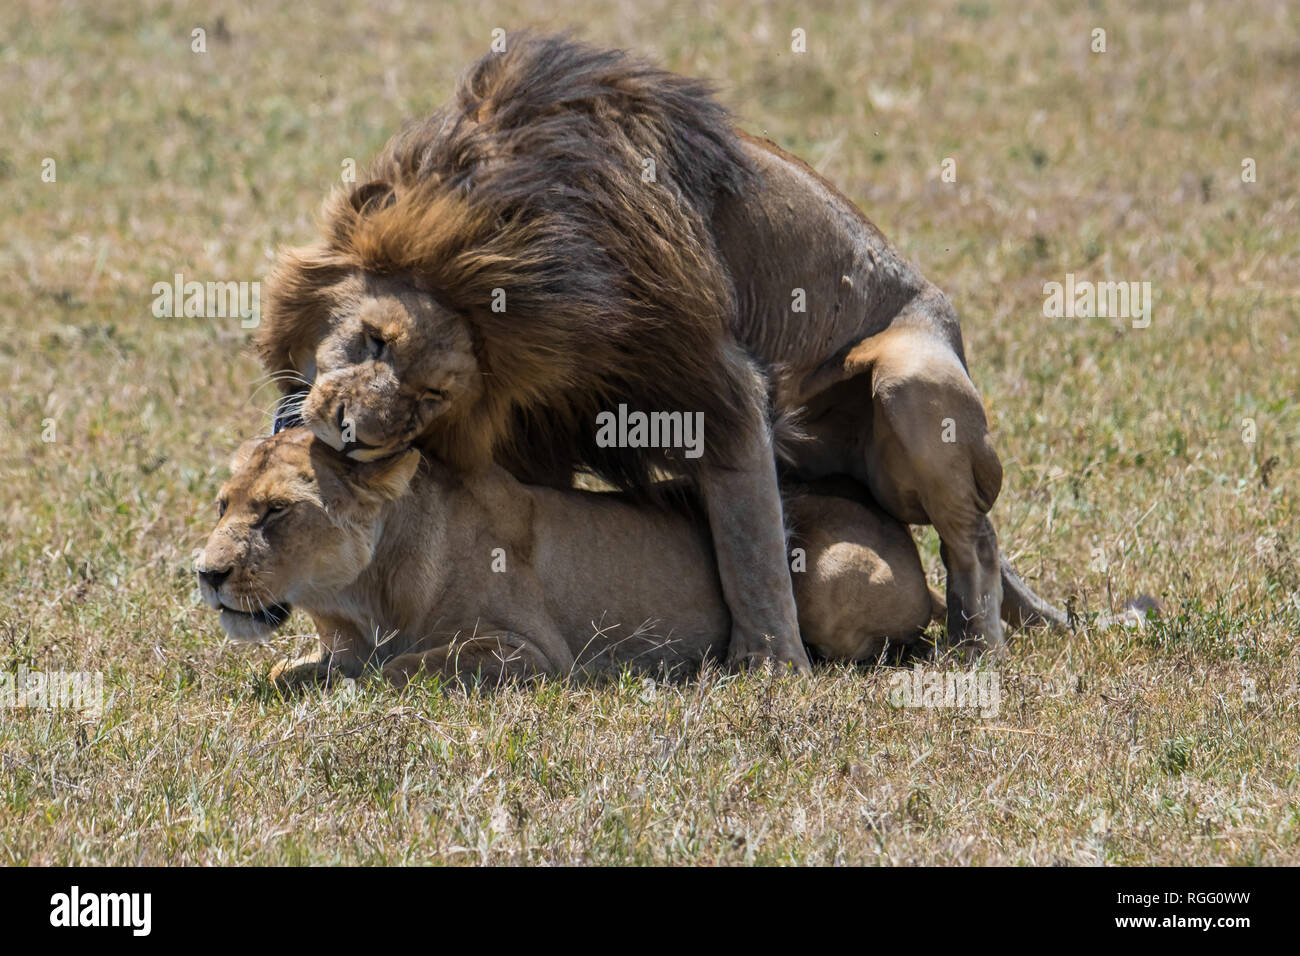 Lion and lioness mating time Stock Photo